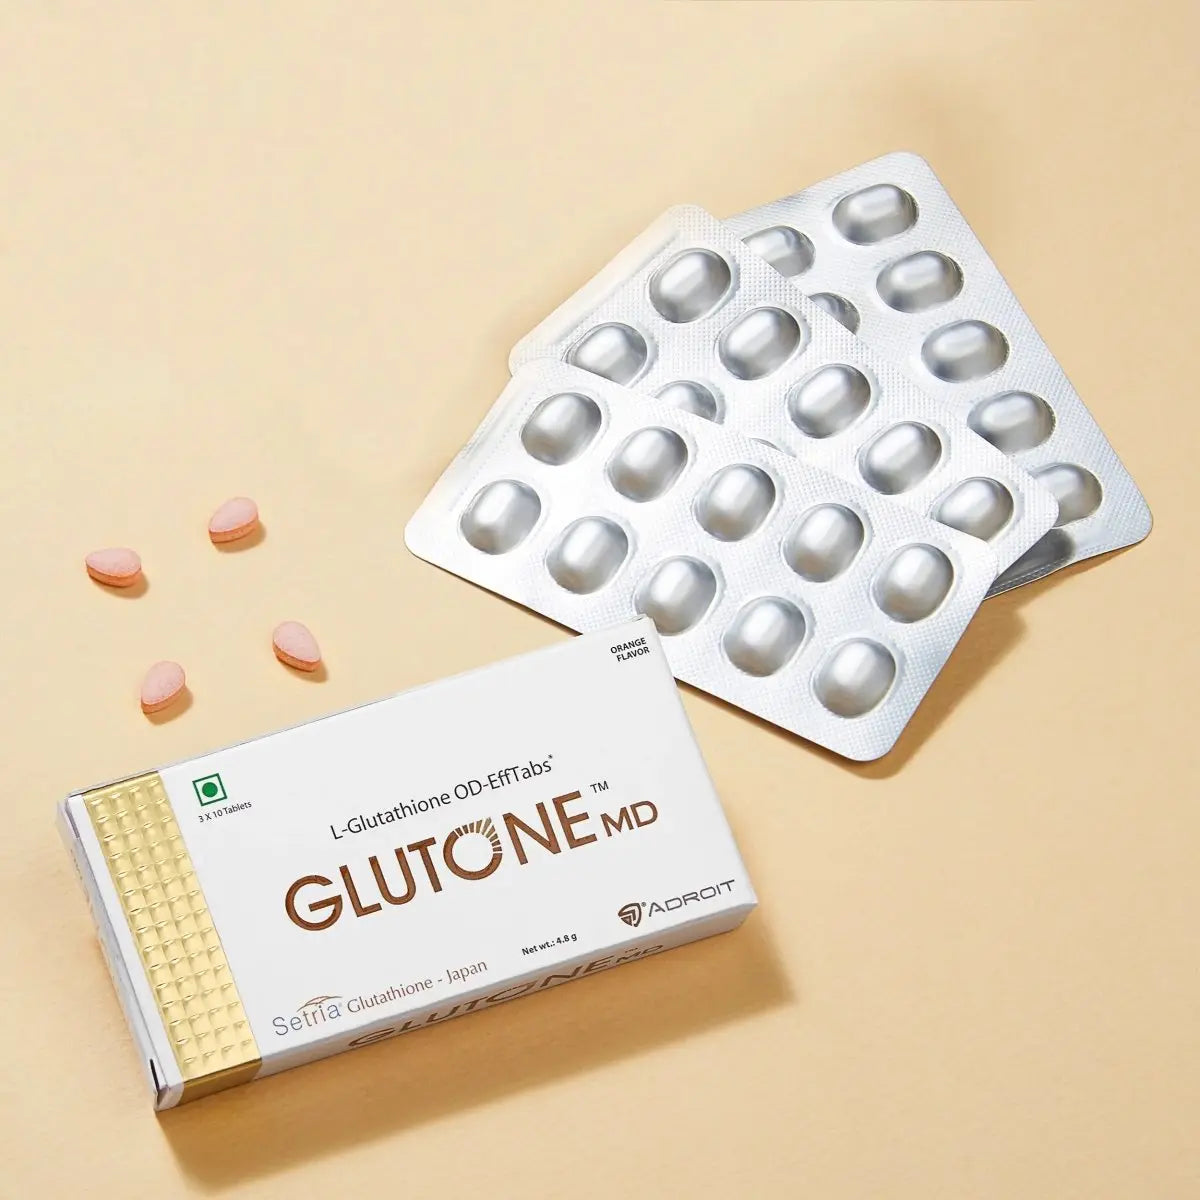 Glutone MD Orally Dissolving Mini Effervescent Setria Glutathione Tablets I 30 Tablets I Skin Glow and Radiance I Beauty from Within